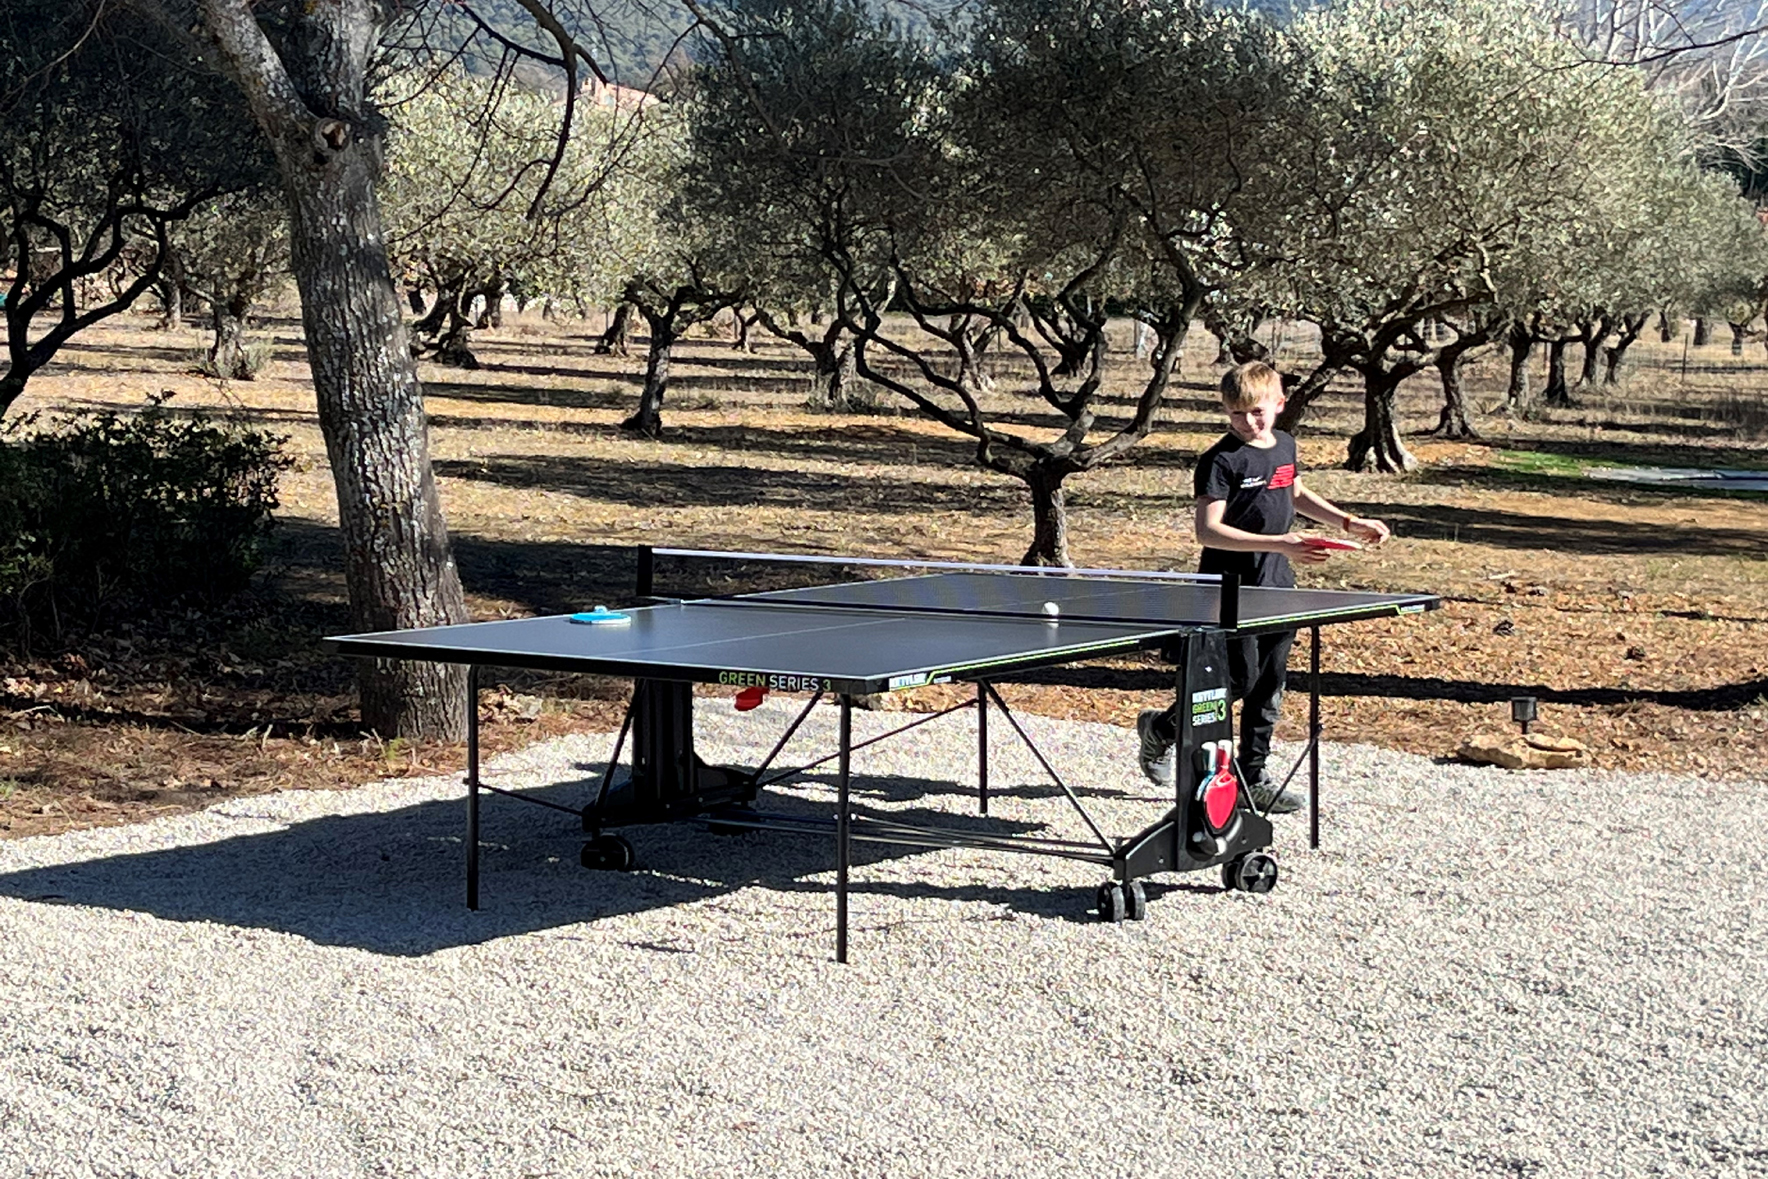 Le Mas Aups - Table Tennis in the olive grove